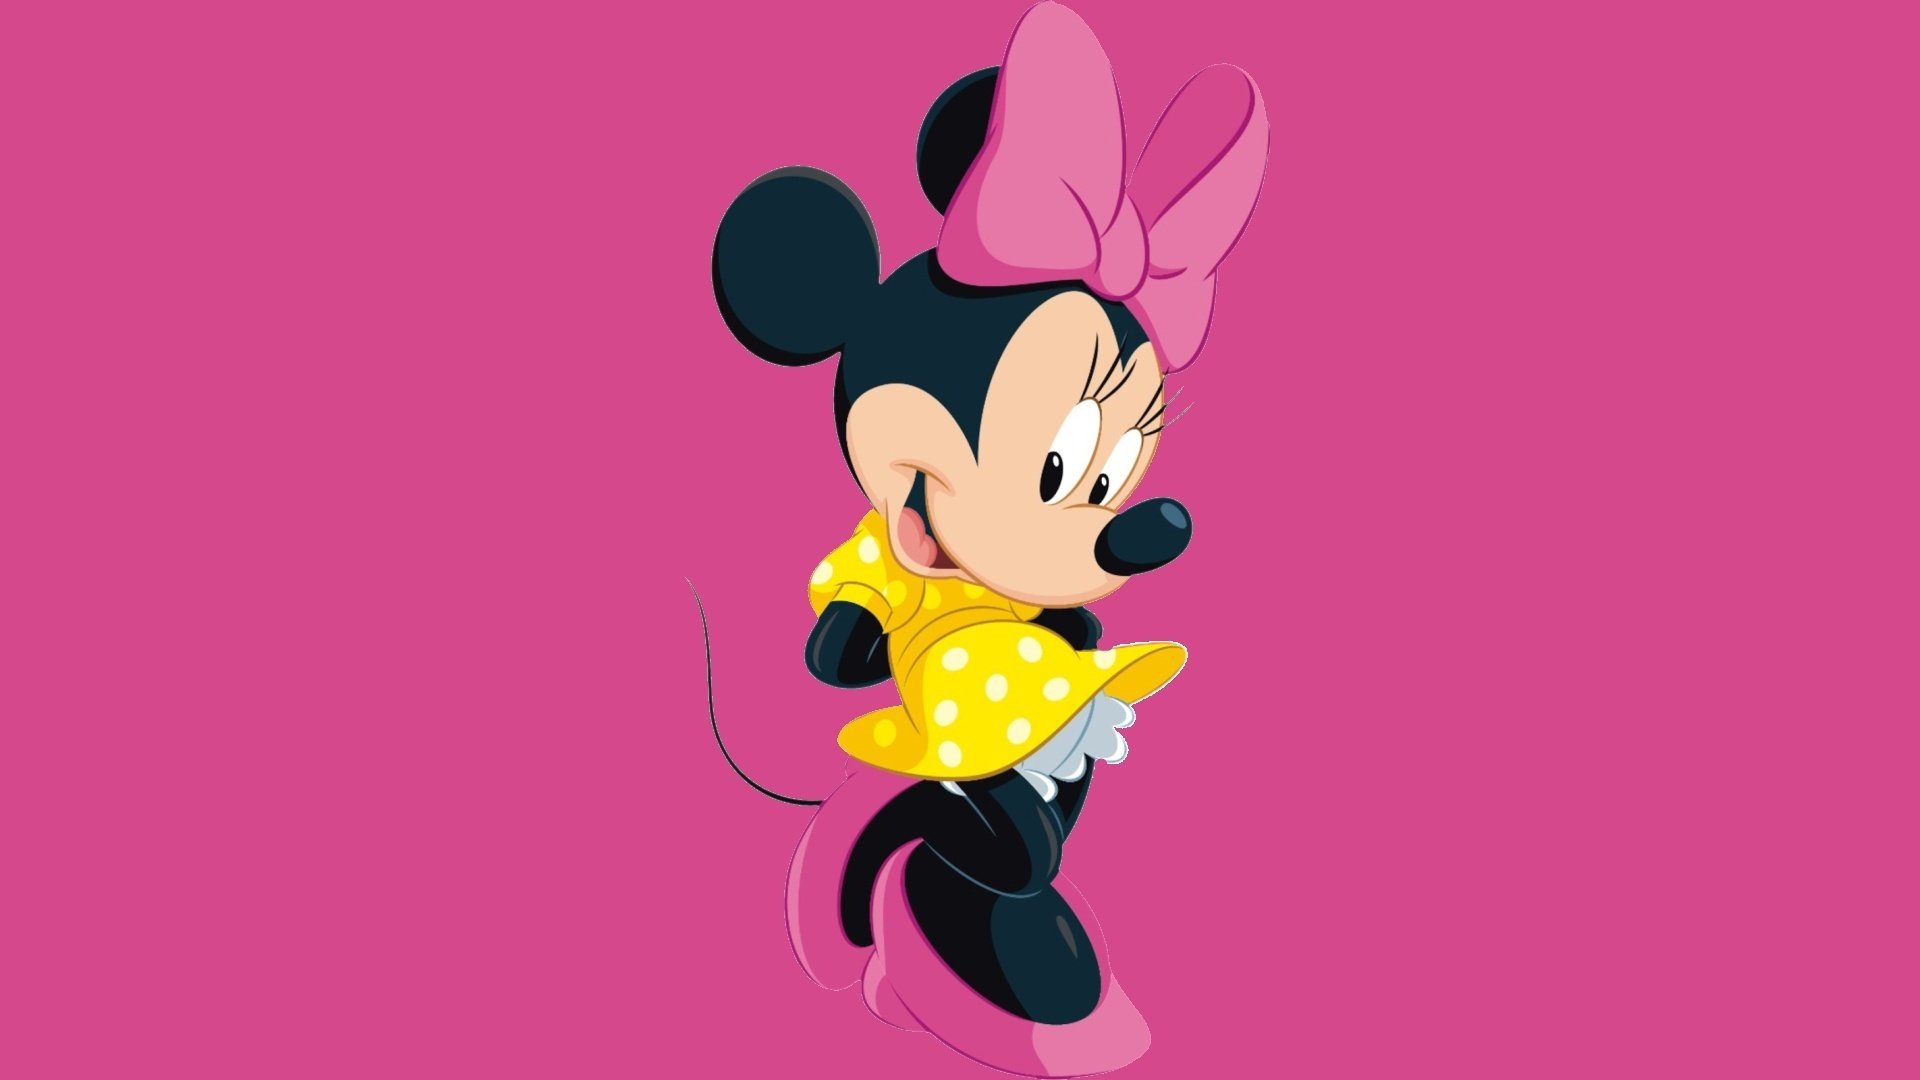 Wallpapers Collection Minnie Mouse Wallpapers 1920x1080